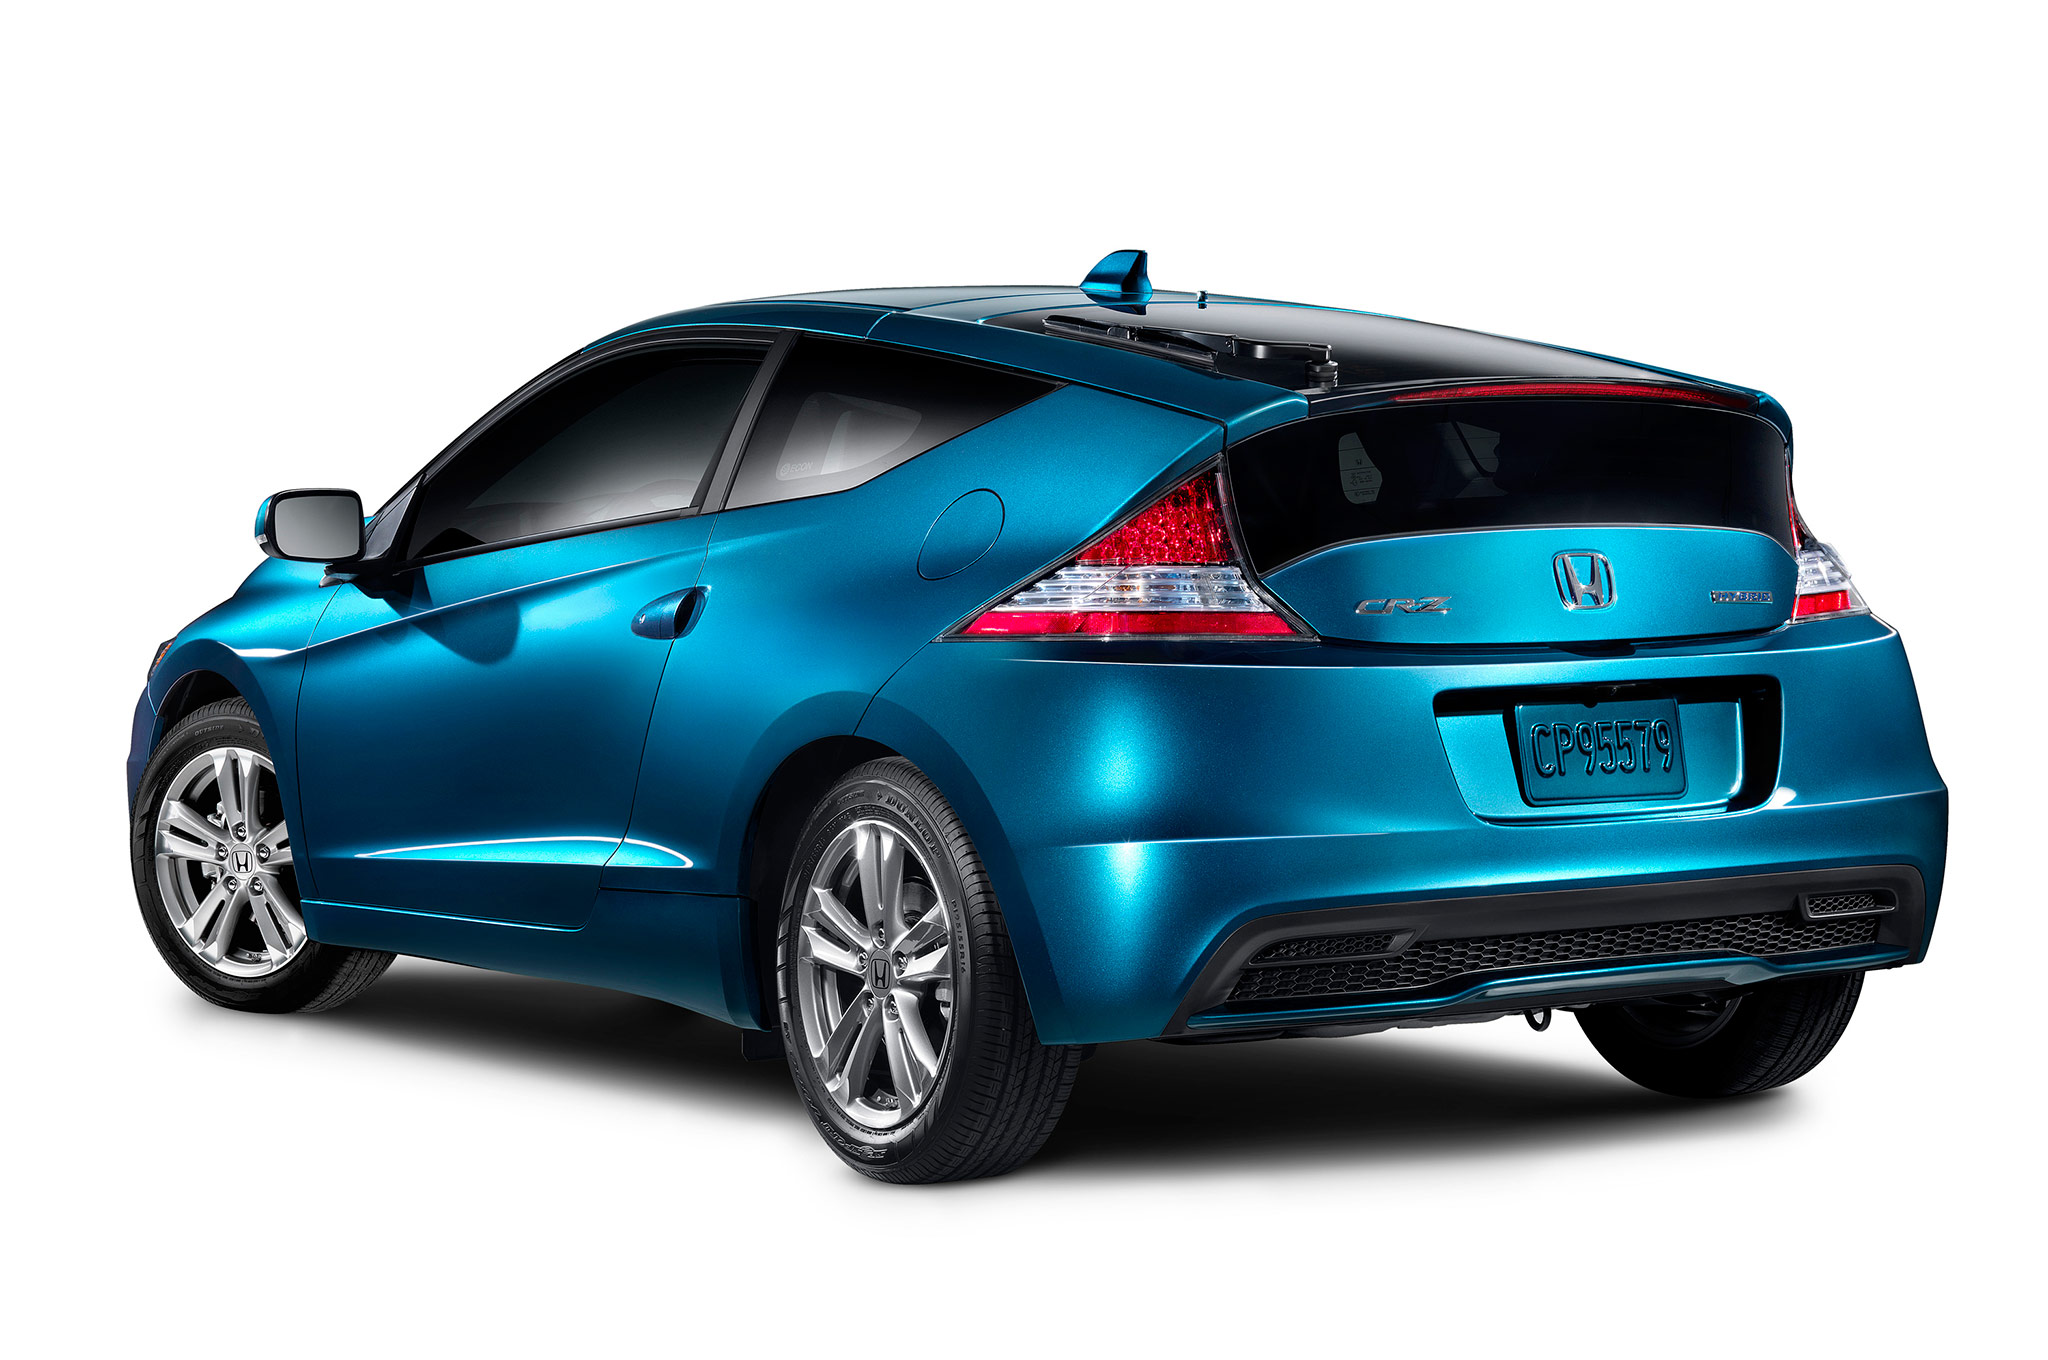 2015 Honda CR-Z Detailed, Price Hikes $150 Over the 2014 Model Year ...